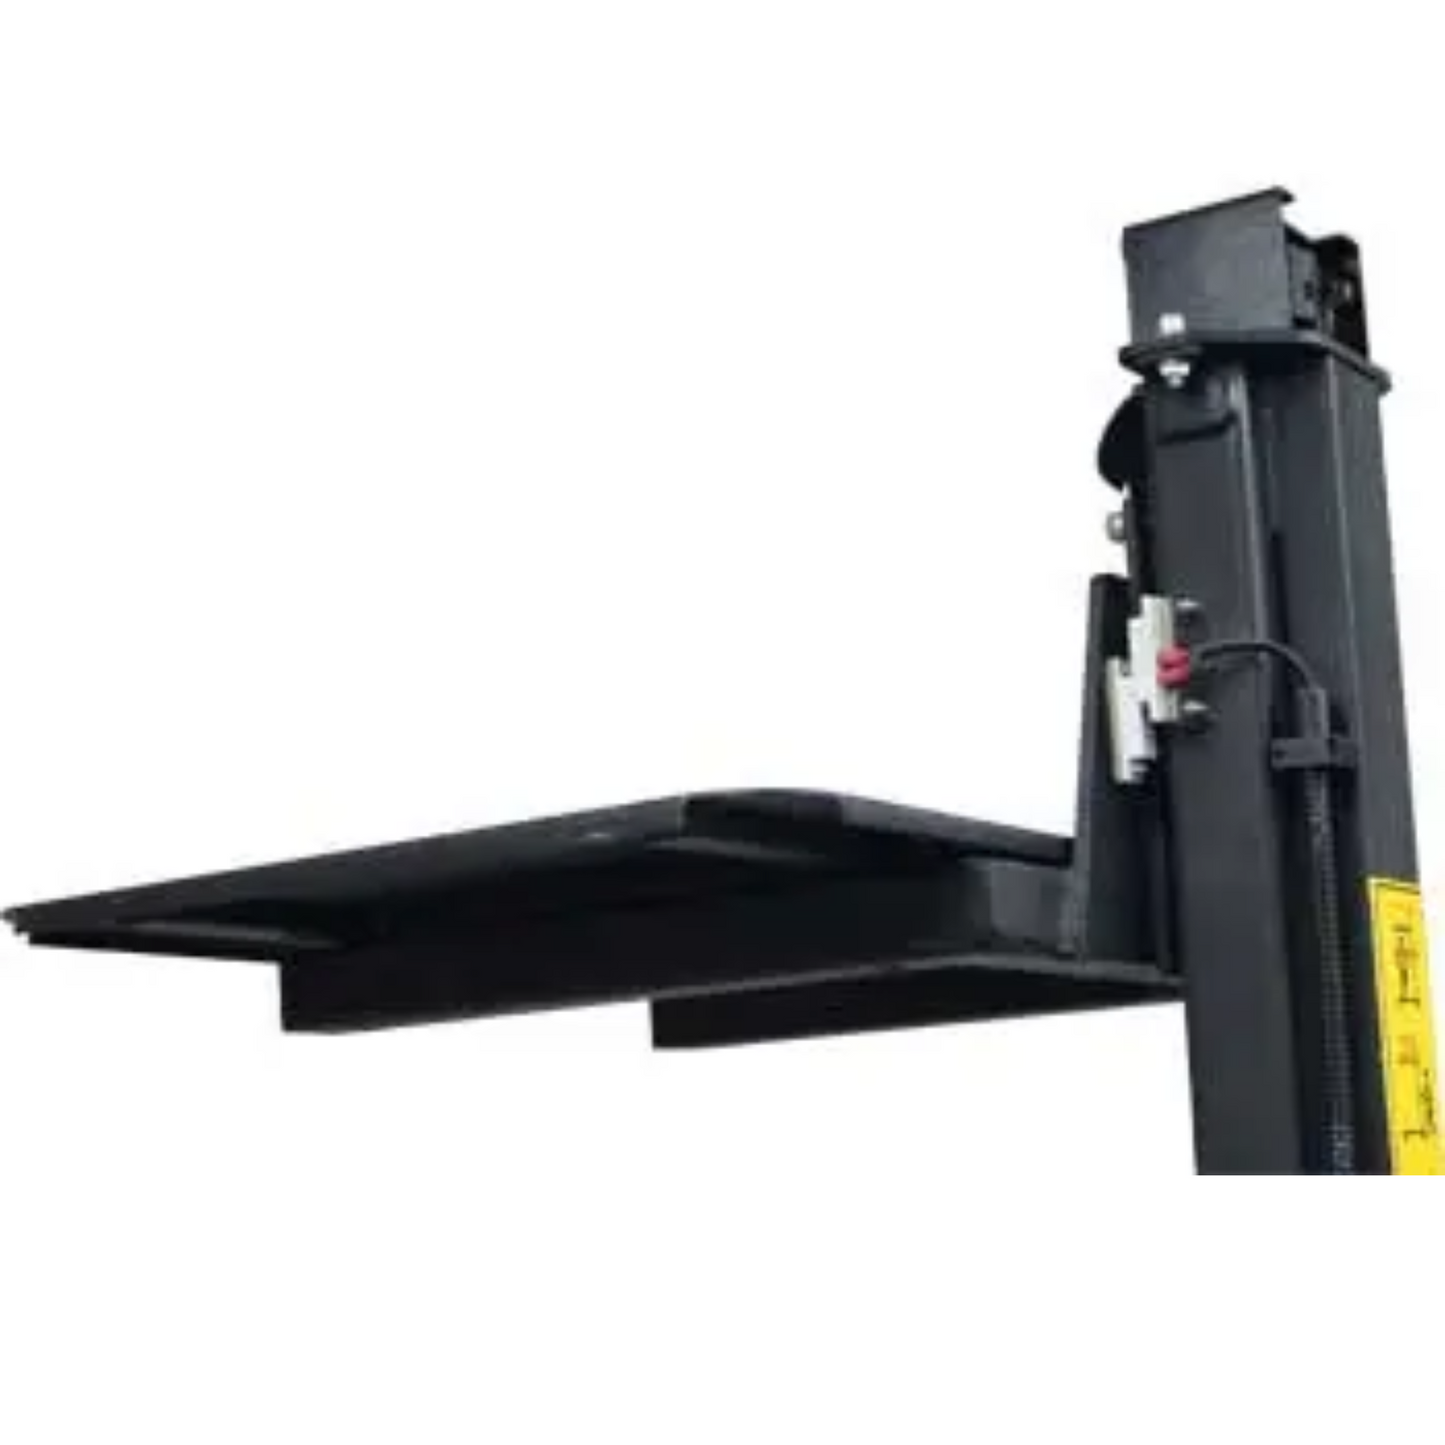 Maximize Efficiency with the Maxx-Ergo-Lifter: Versatile and Ergonomic Material Handling Solution